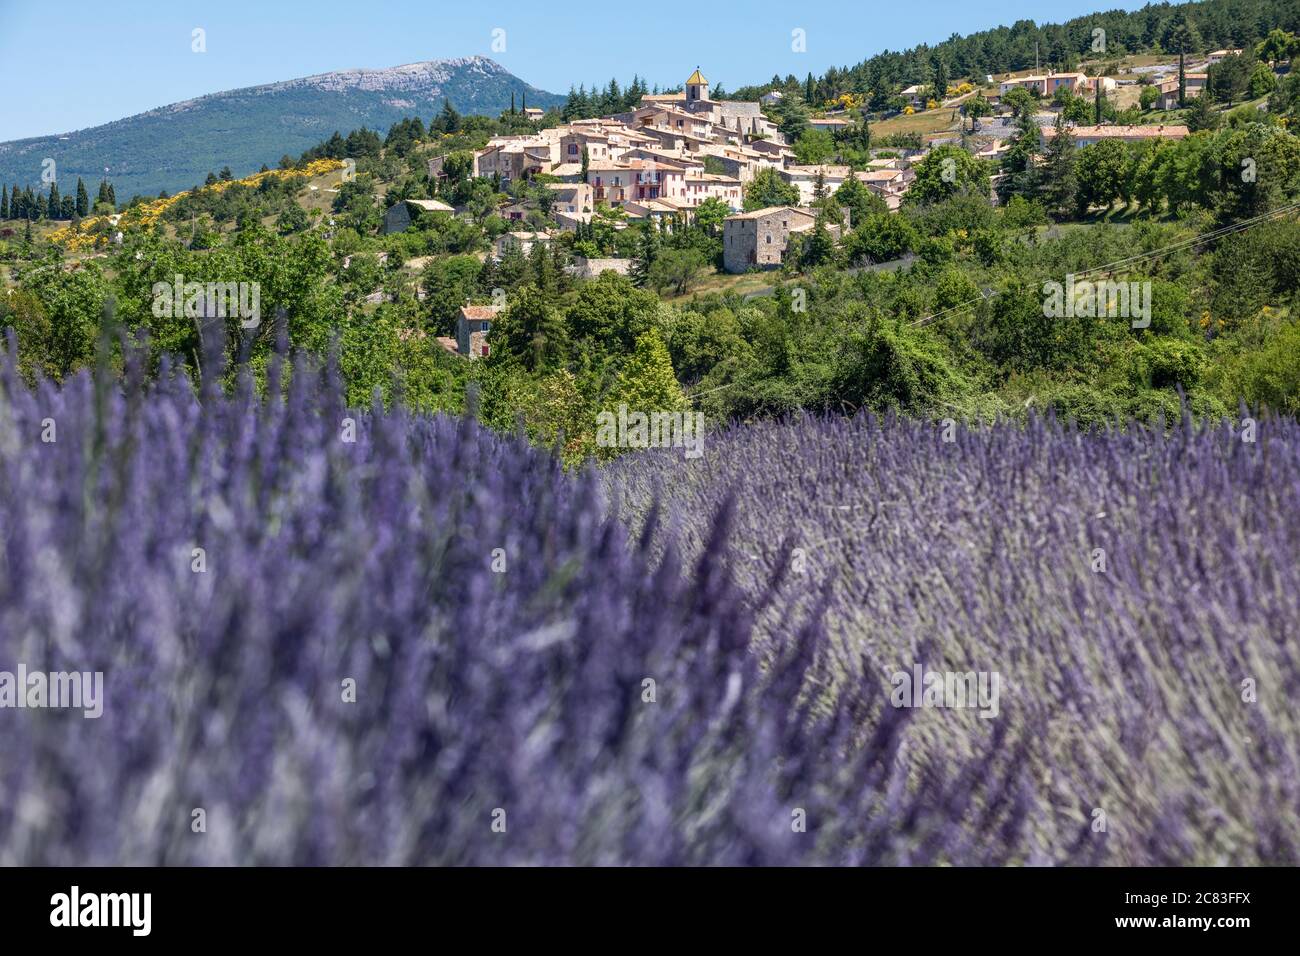 Close up of the french village of Aurel, surrounded by colorful lavender fields, under a blue summer sky Stock Photo